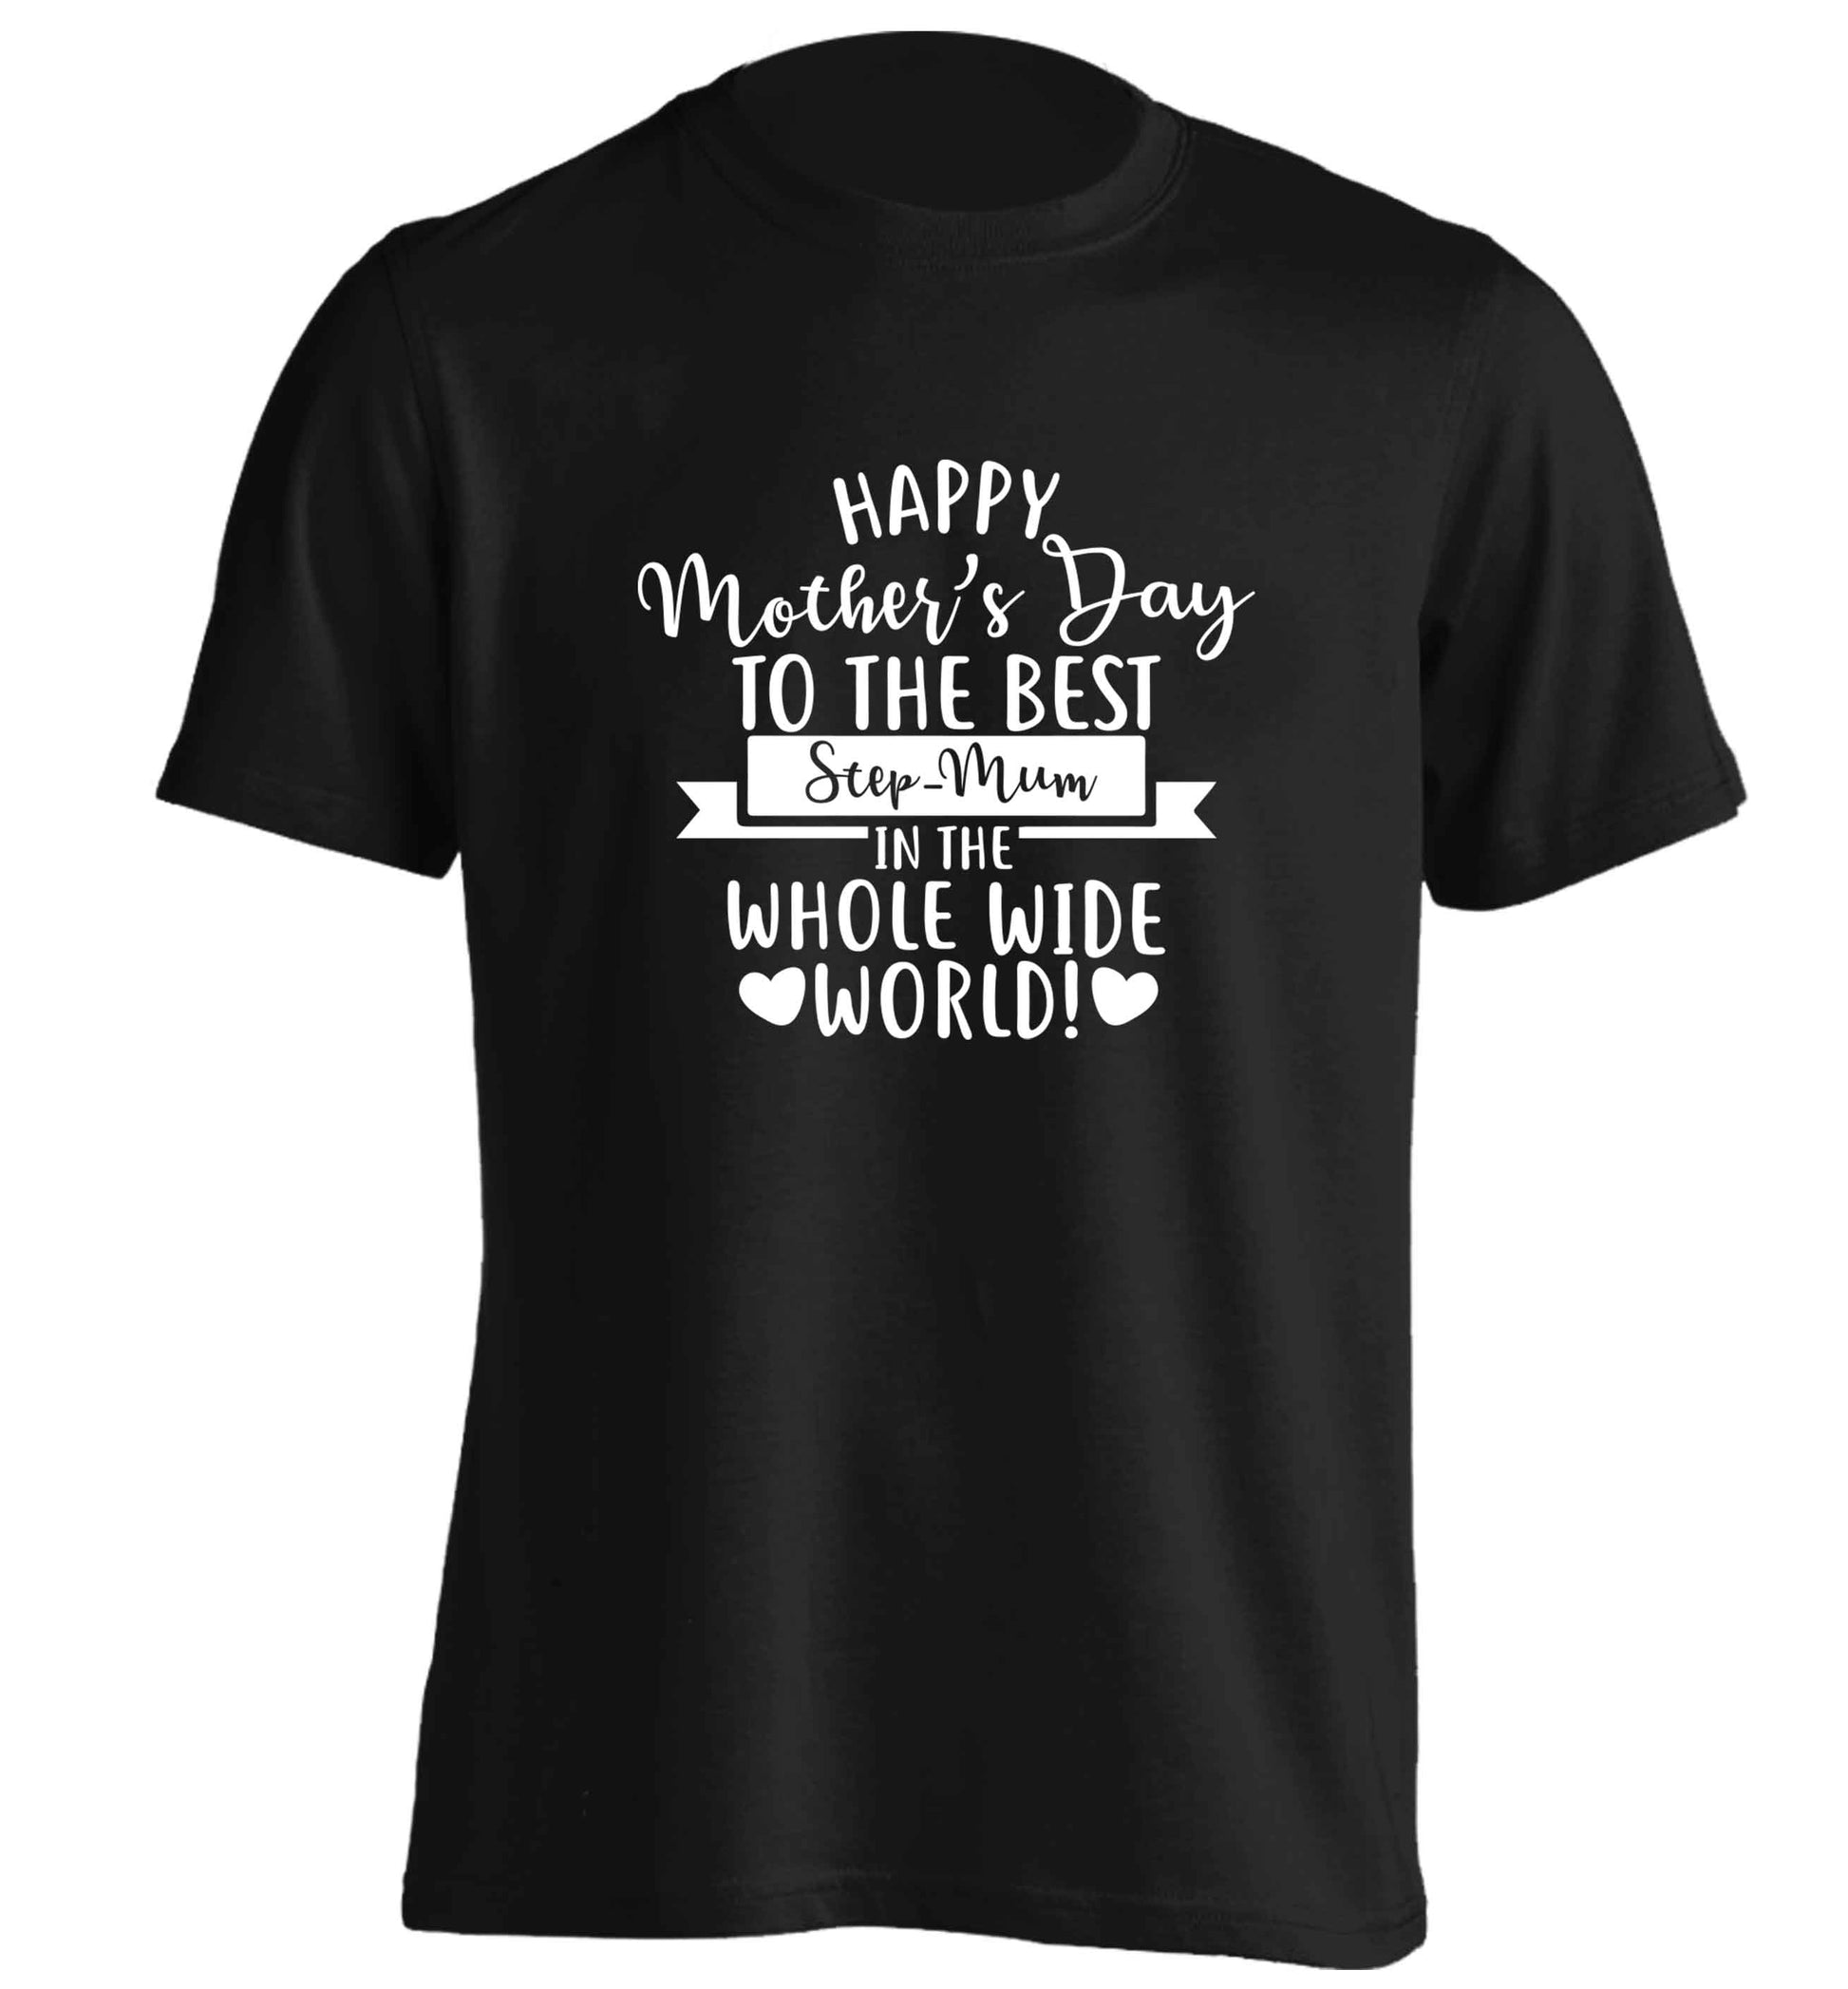 Happy mother's day to the best step-mum in the world adults unisex black Tshirt 2XL